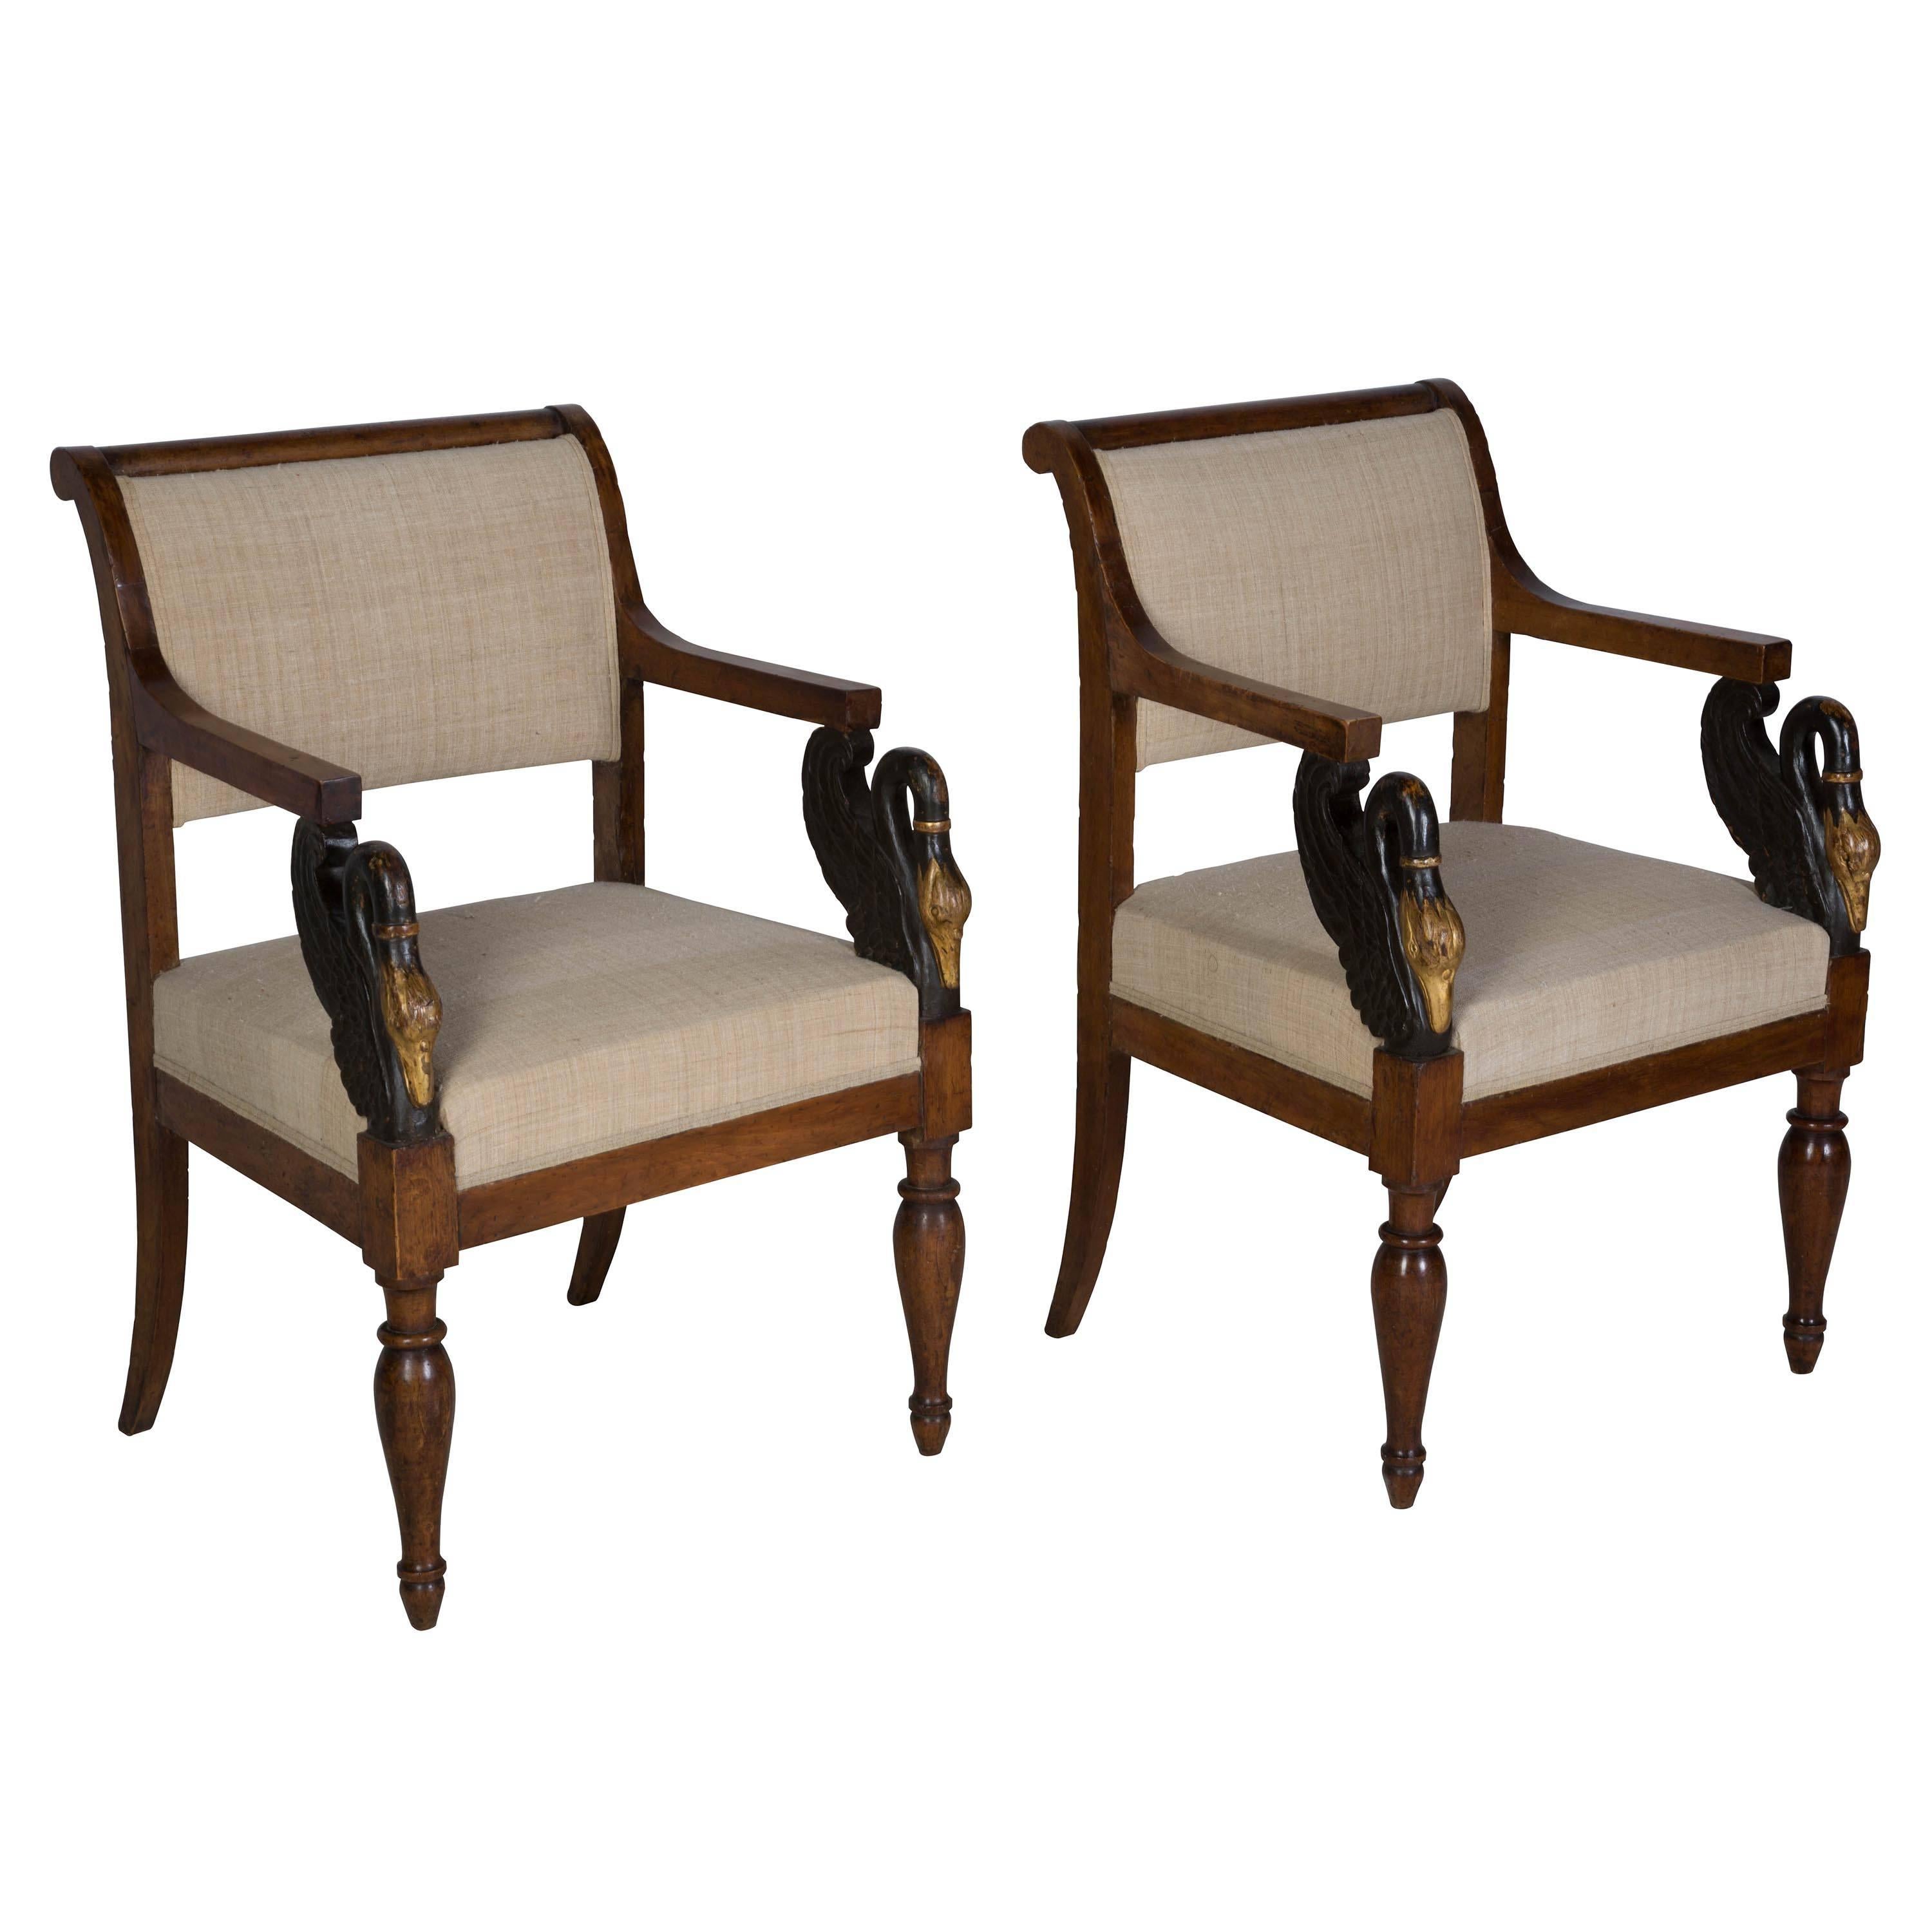 Beautiful pair of early 19th century Italian chairs in walnut with gilded and ebonised carved swan decoration.